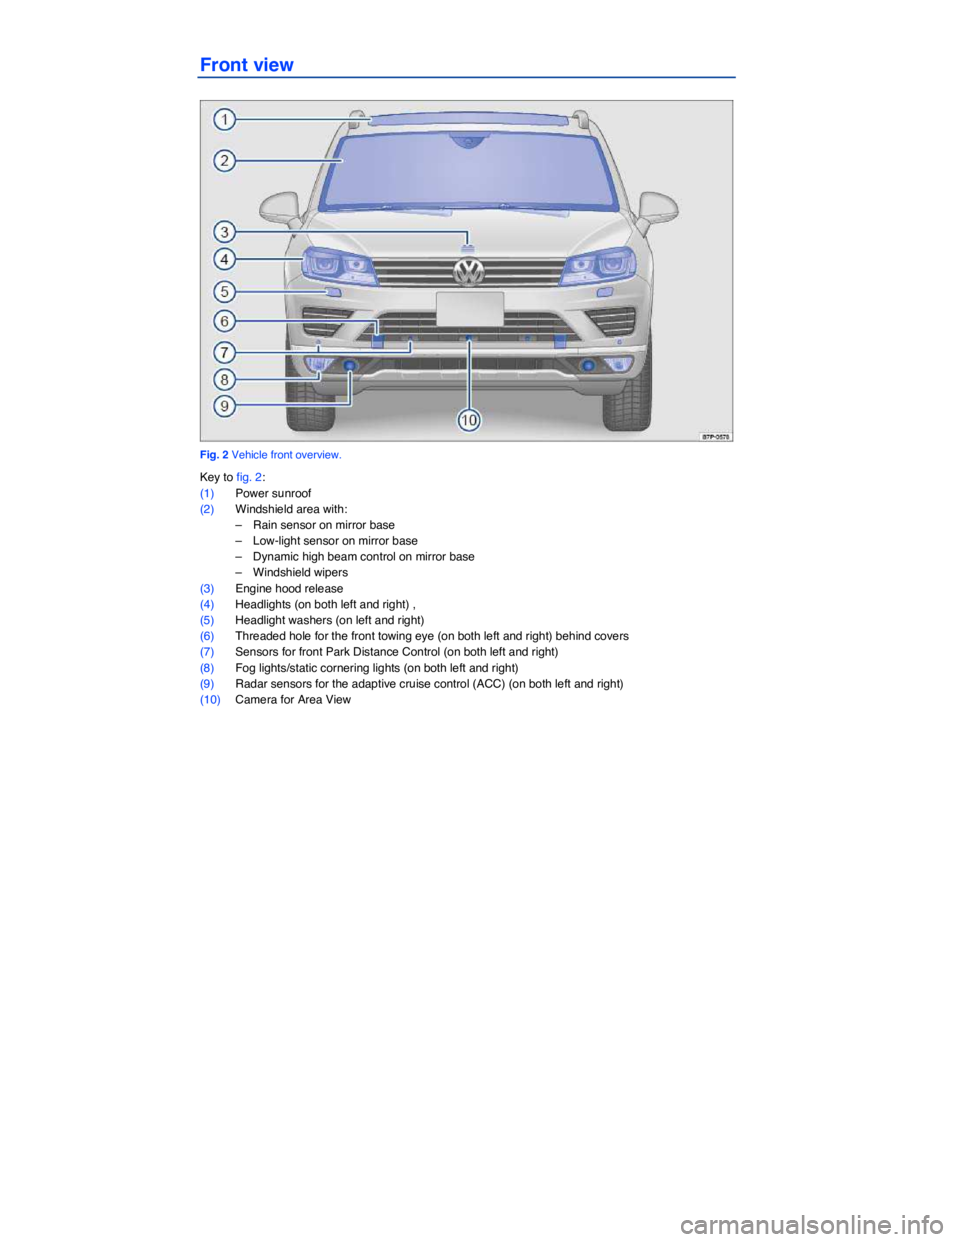 VOLKSWAGEN TOUAREG 2010  Owners Manual  
Front view 
 
Fig. 2 Vehicle front overview. 
Key to fig. 2: 
(1) Power sunroof  
(2) Windshield area with: 
–  Rain sensor on mirror base  
–  Low-light sensor on mirror base 
–  Dynamic high